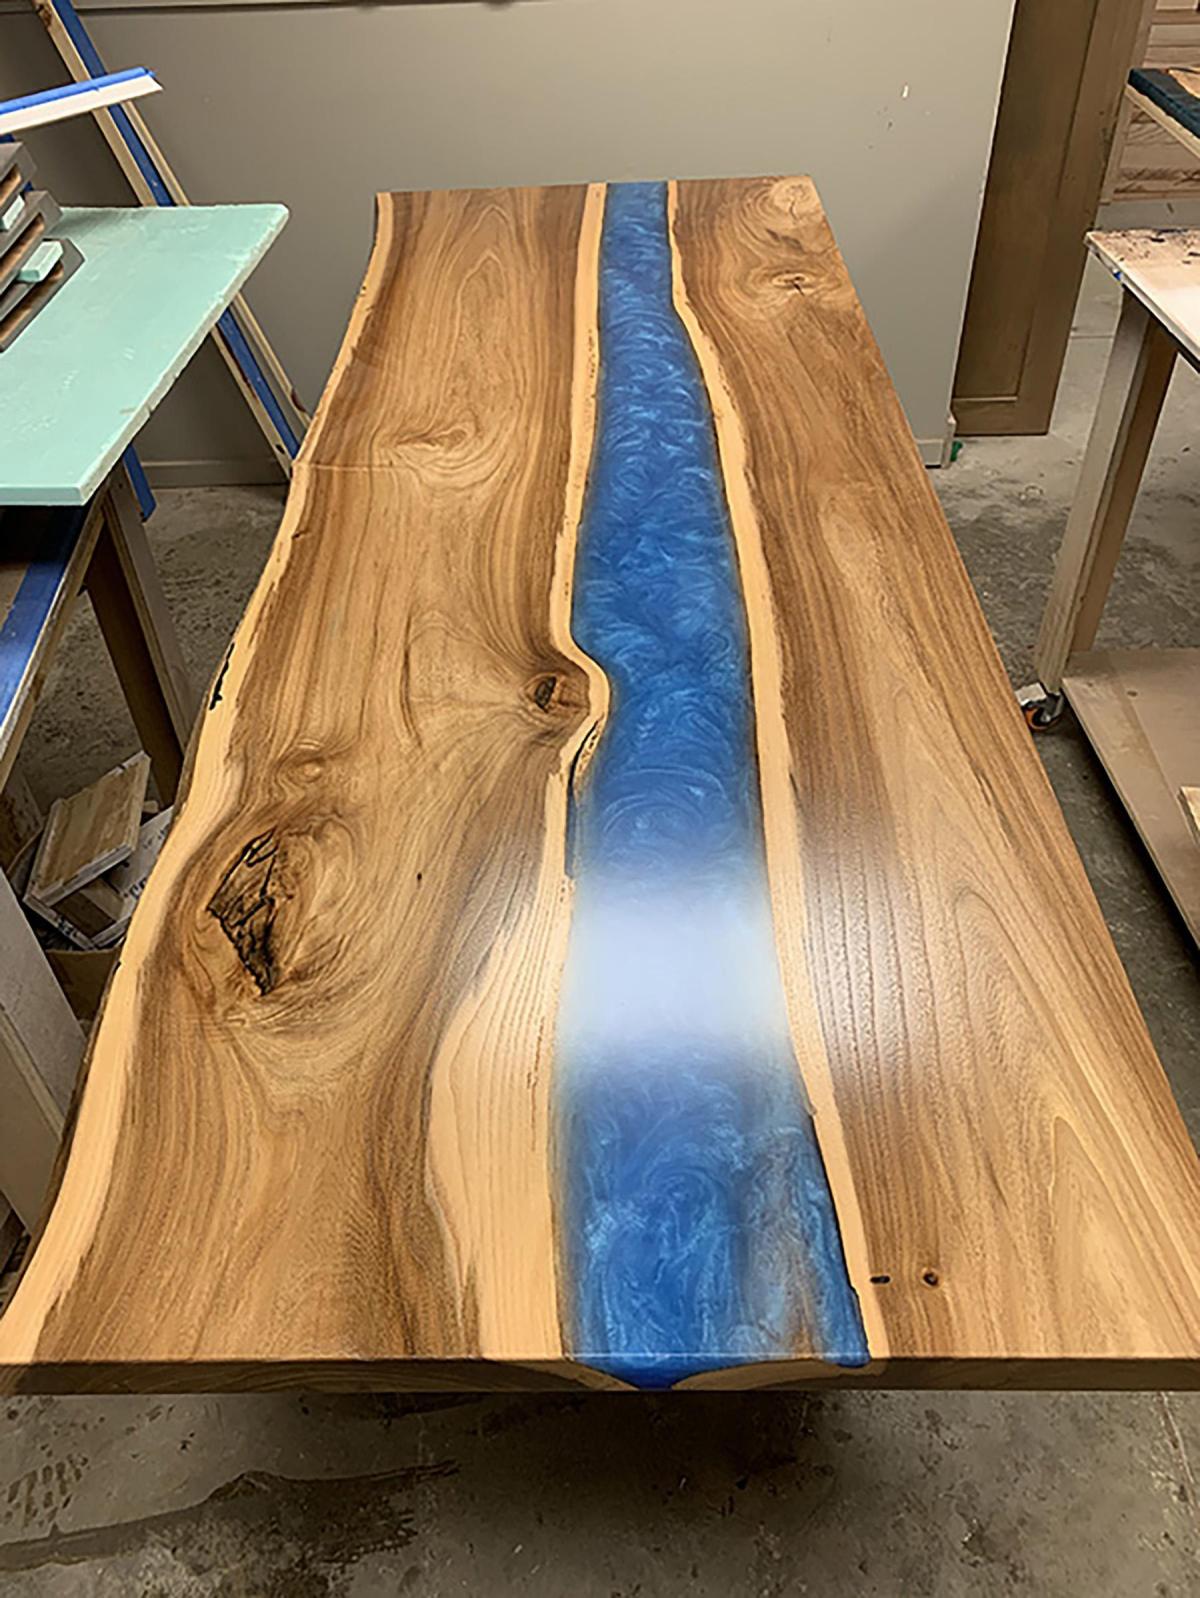 Live Edge Bar Top For Sale With Epoxy